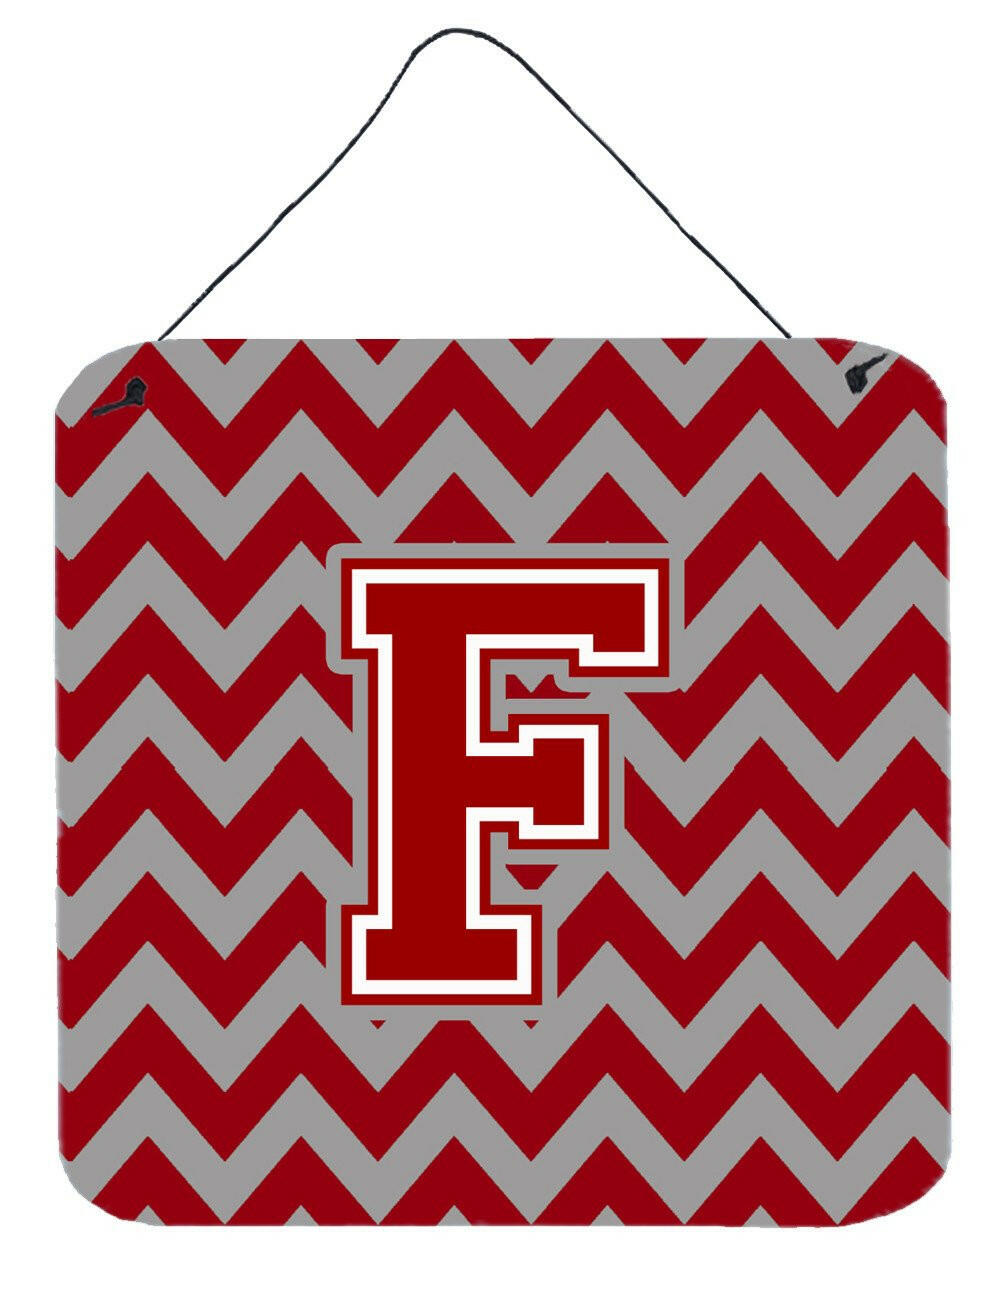 Letter F Chevron Maroon and White Wall or Door Hanging Prints CJ1049-FDS66 by Caroline's Treasures